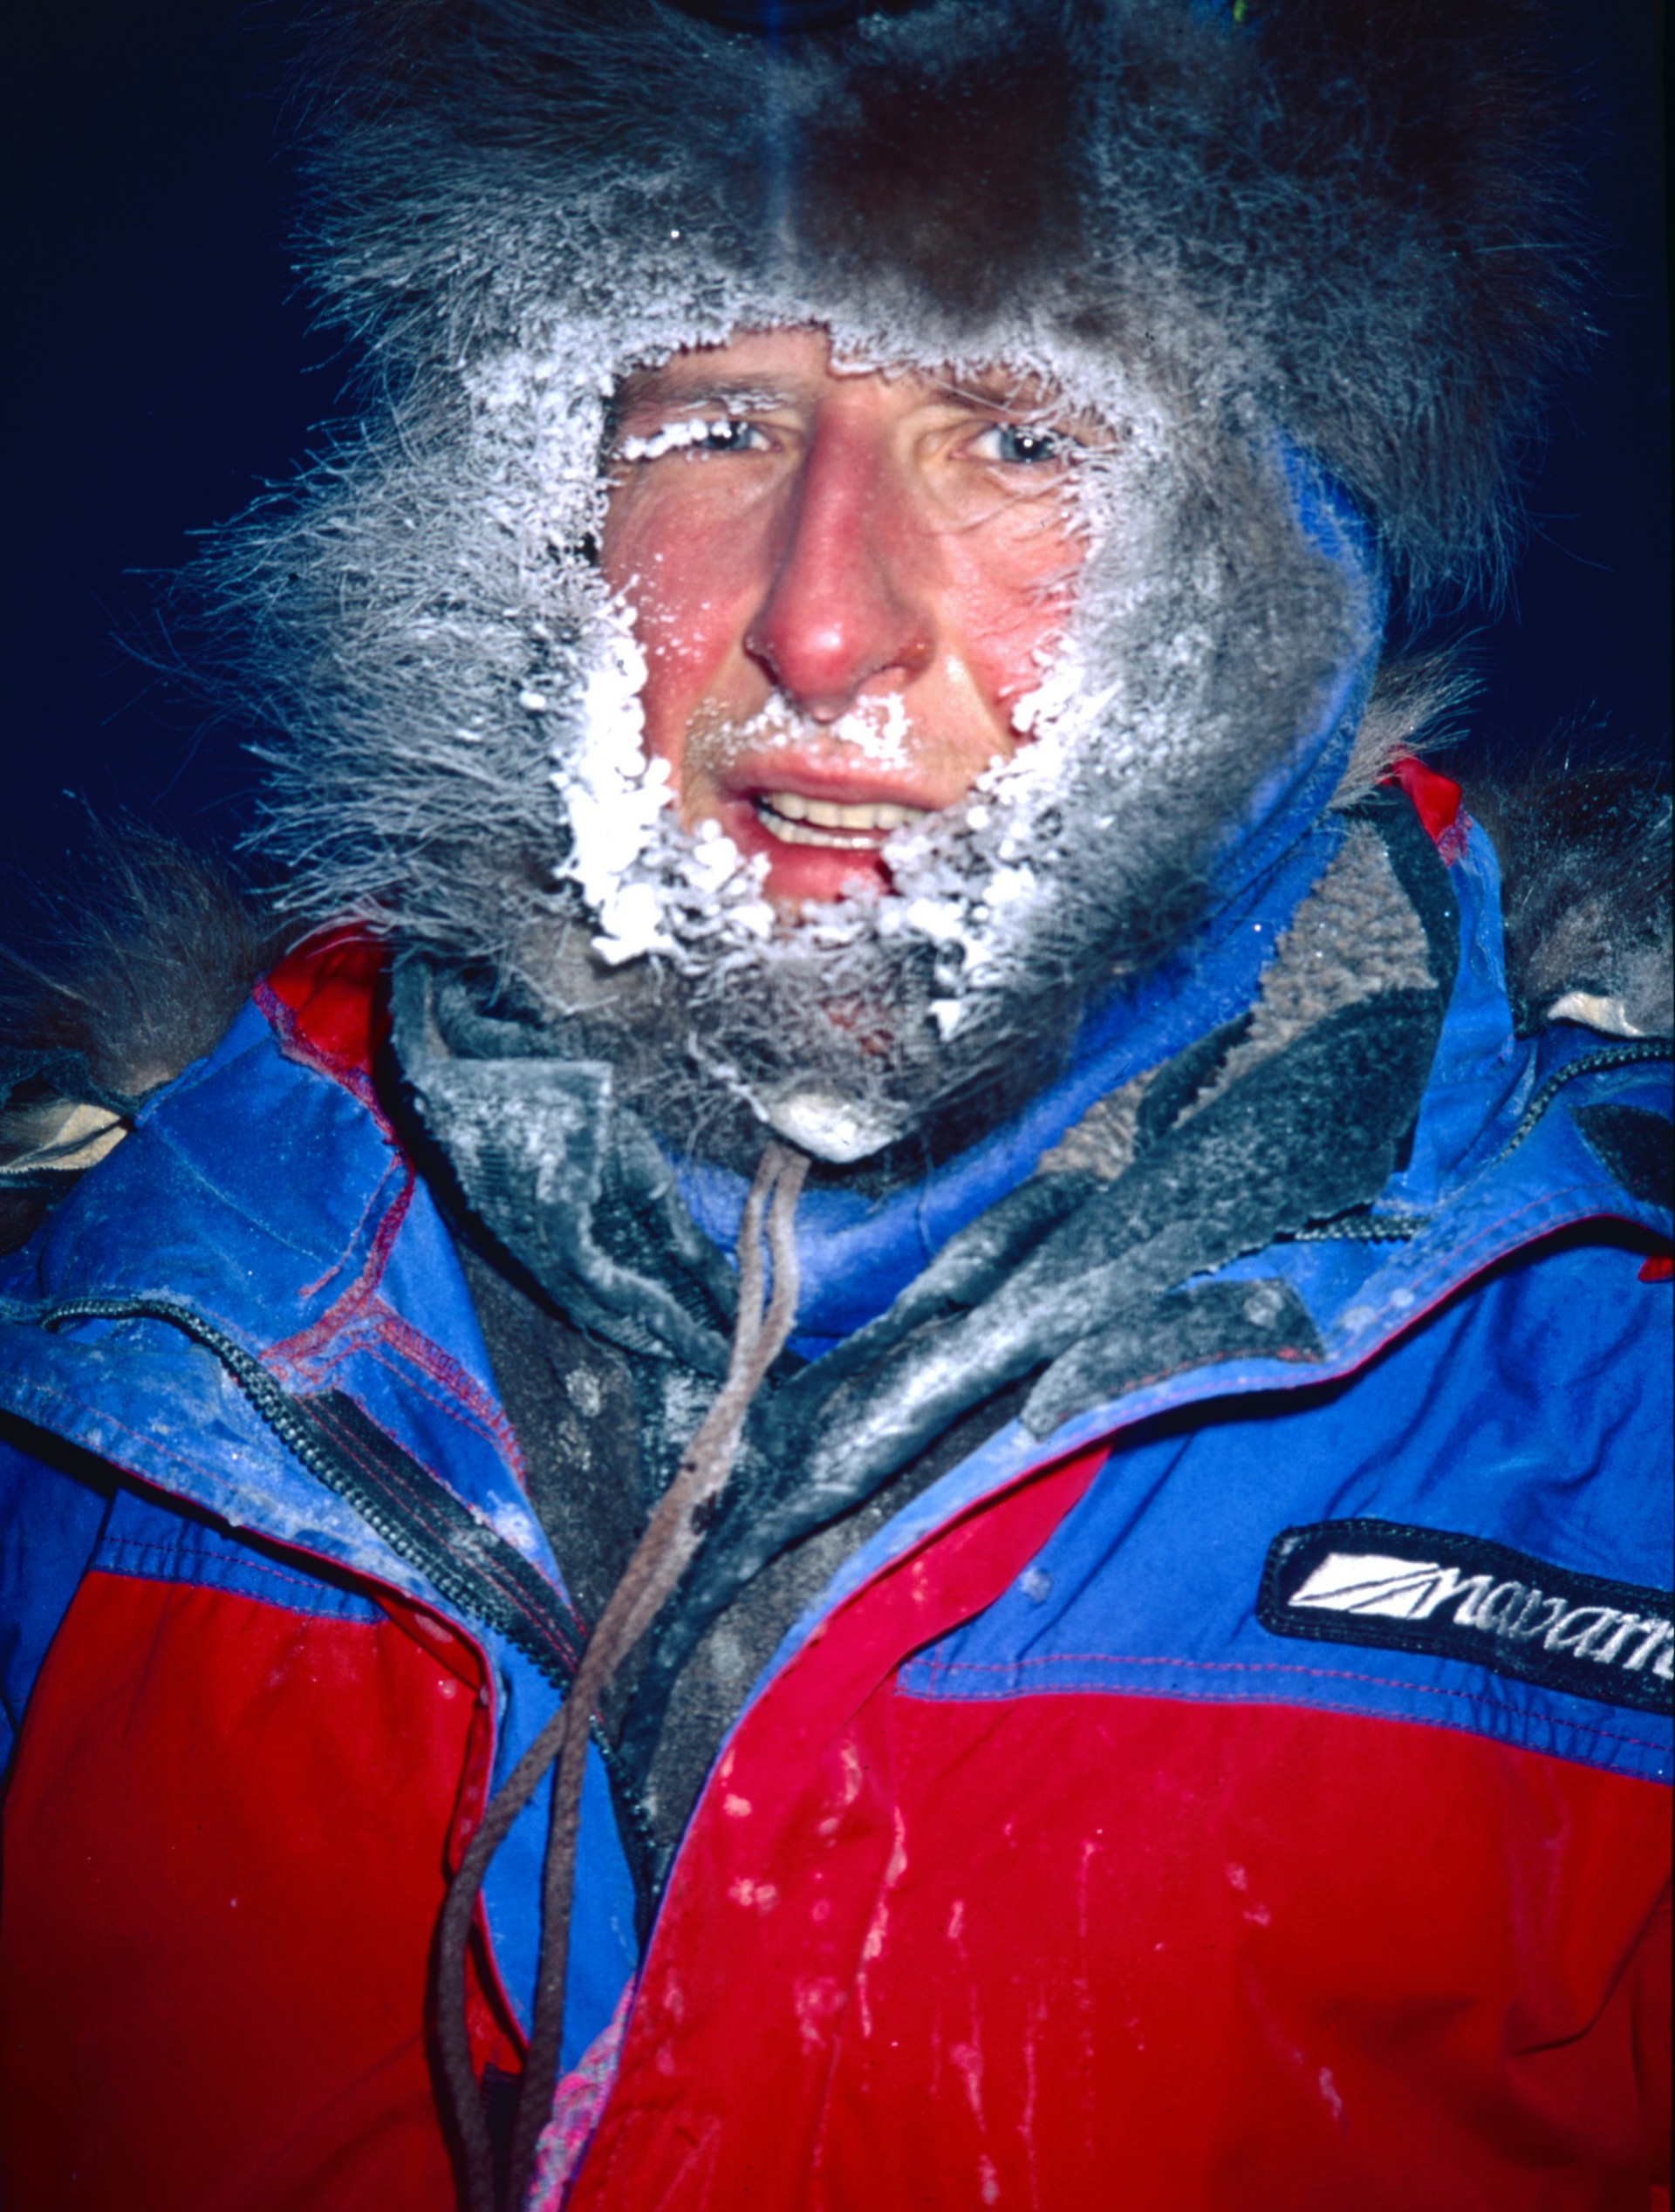 Very cold weather - Richard enroute to the North Pole